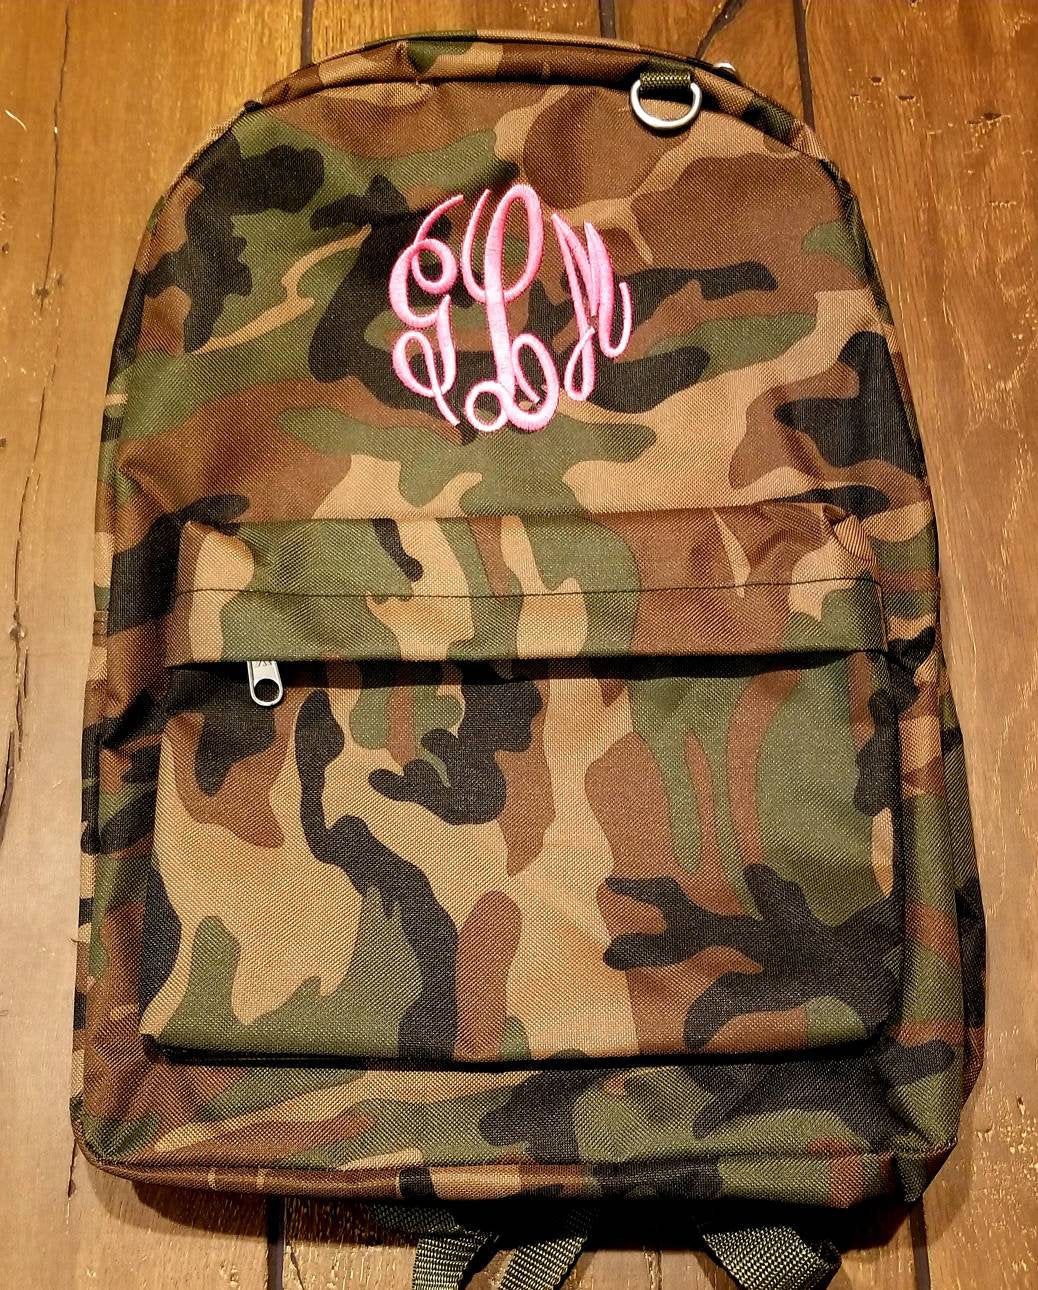 Monogrammed Camo Backpack, Embroidered Camouflage Bookbags